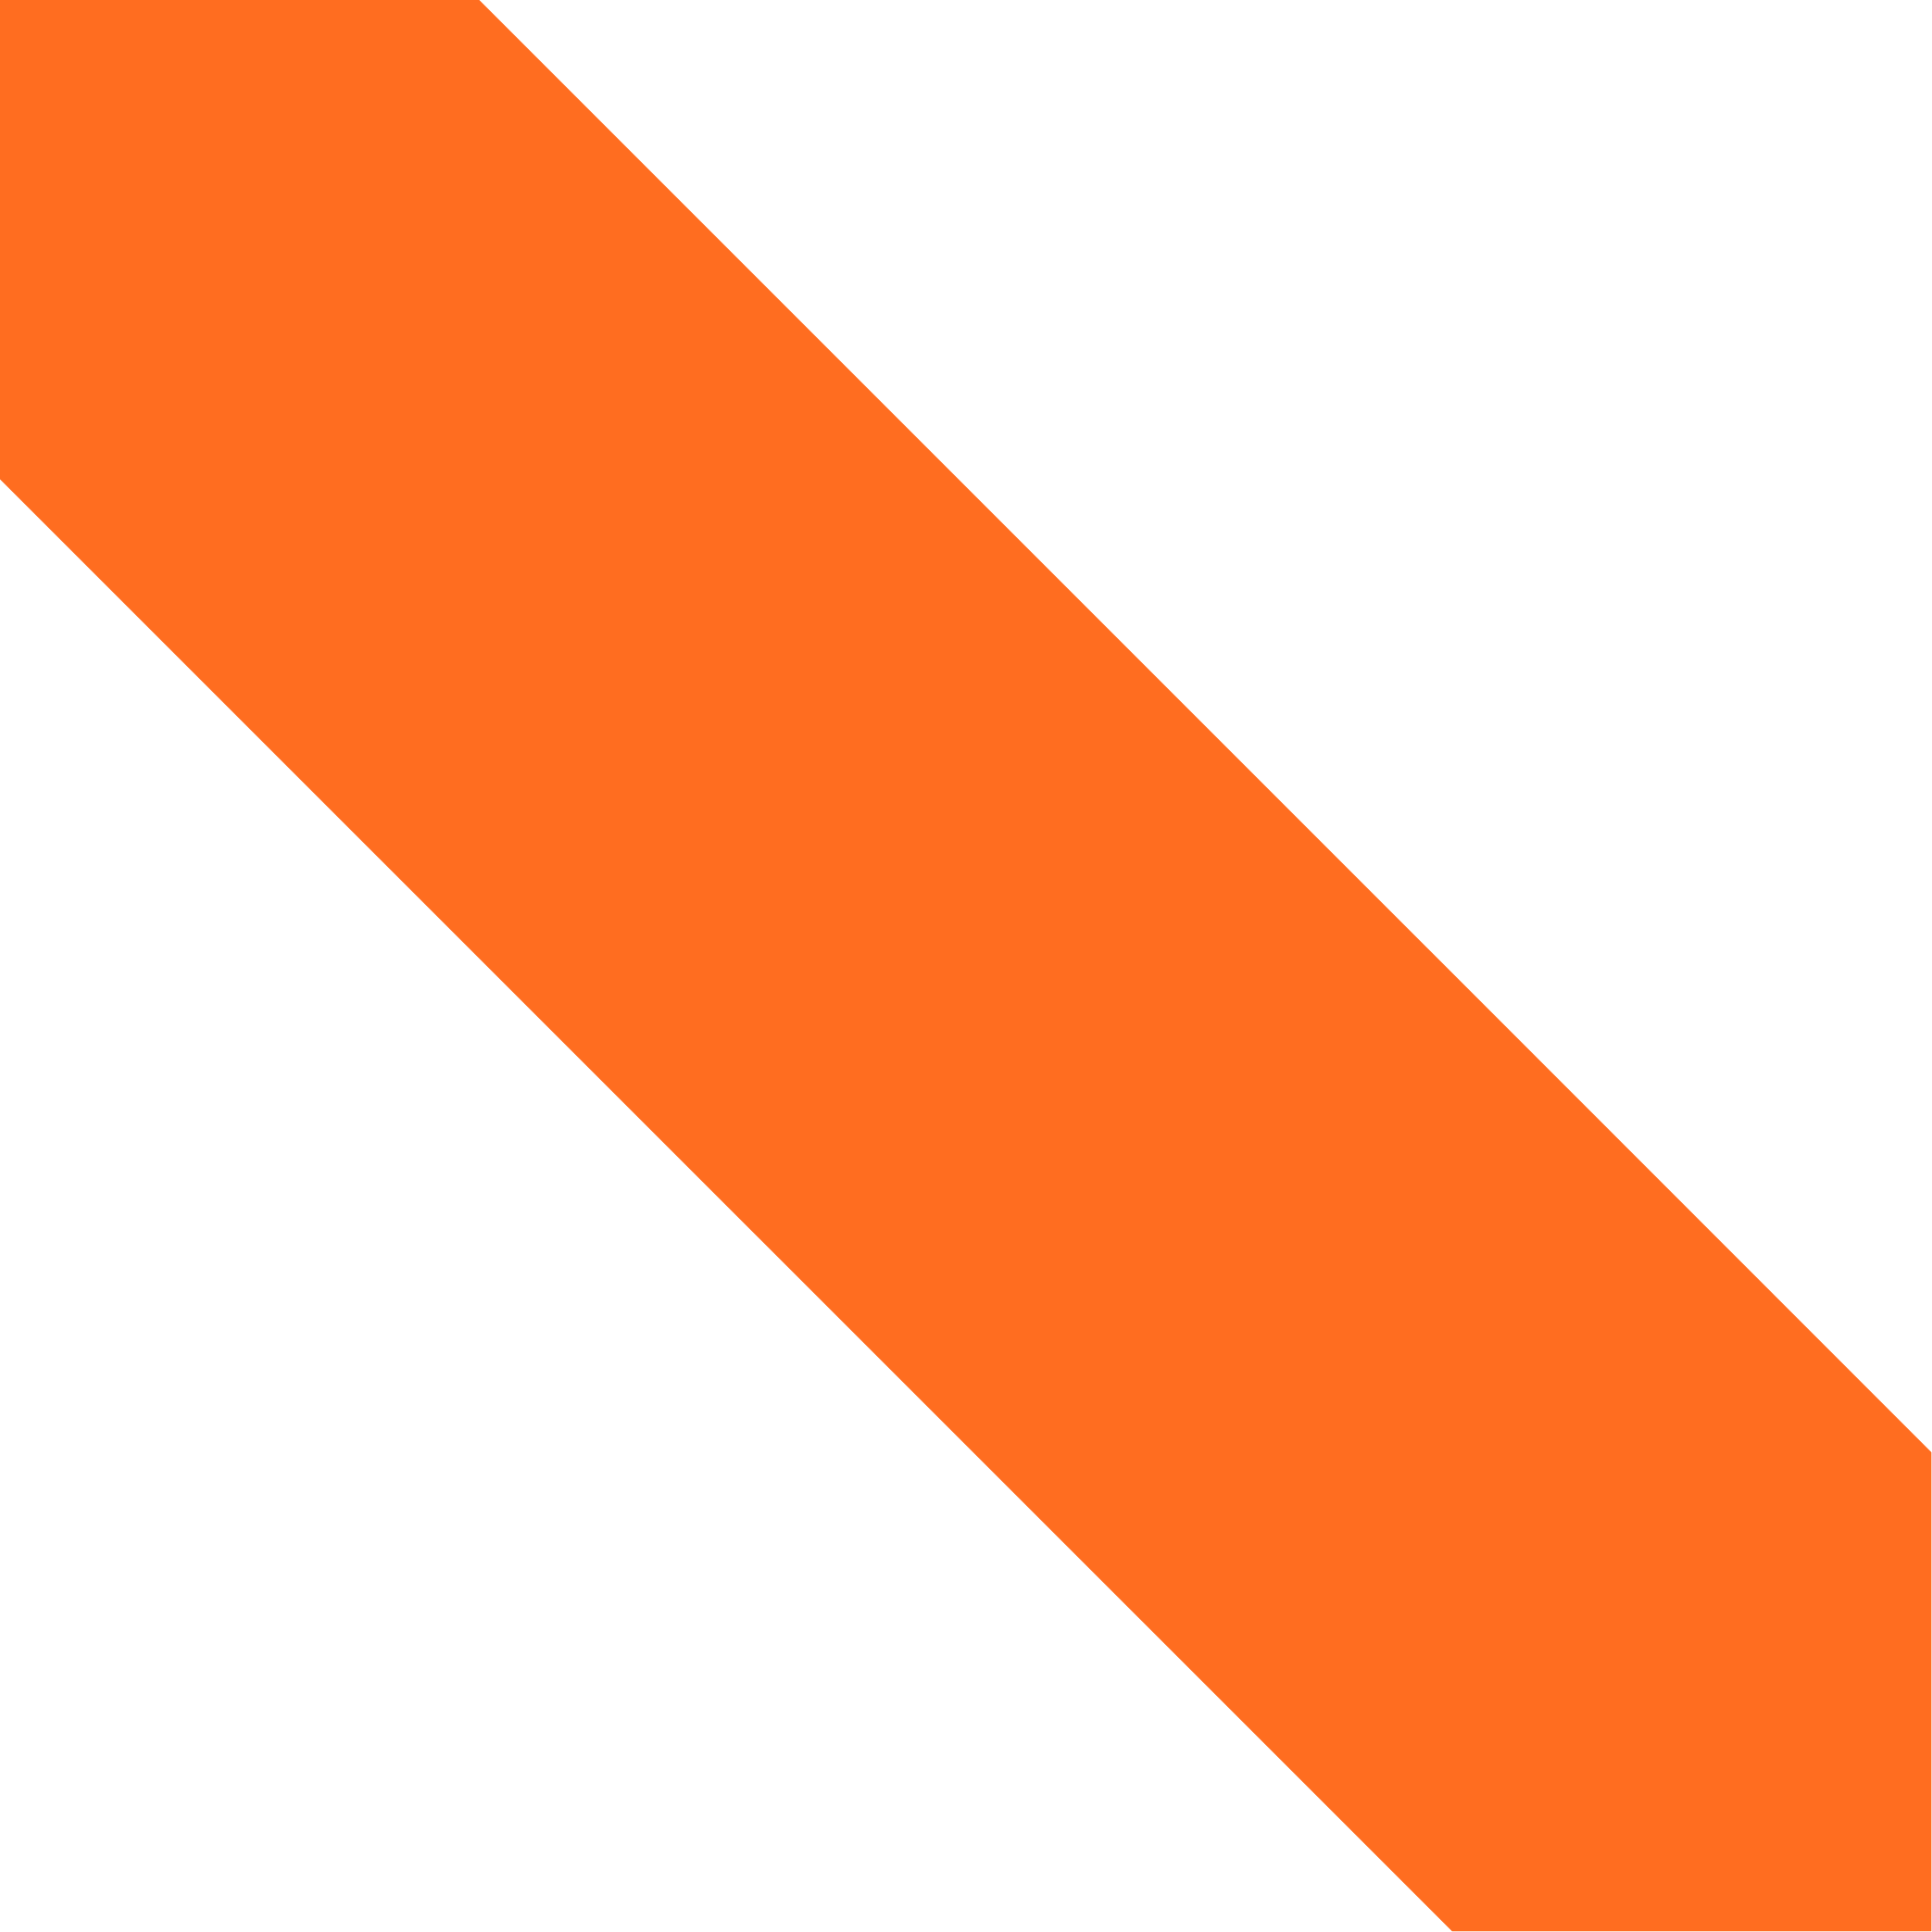 orange prism graphic used for background color